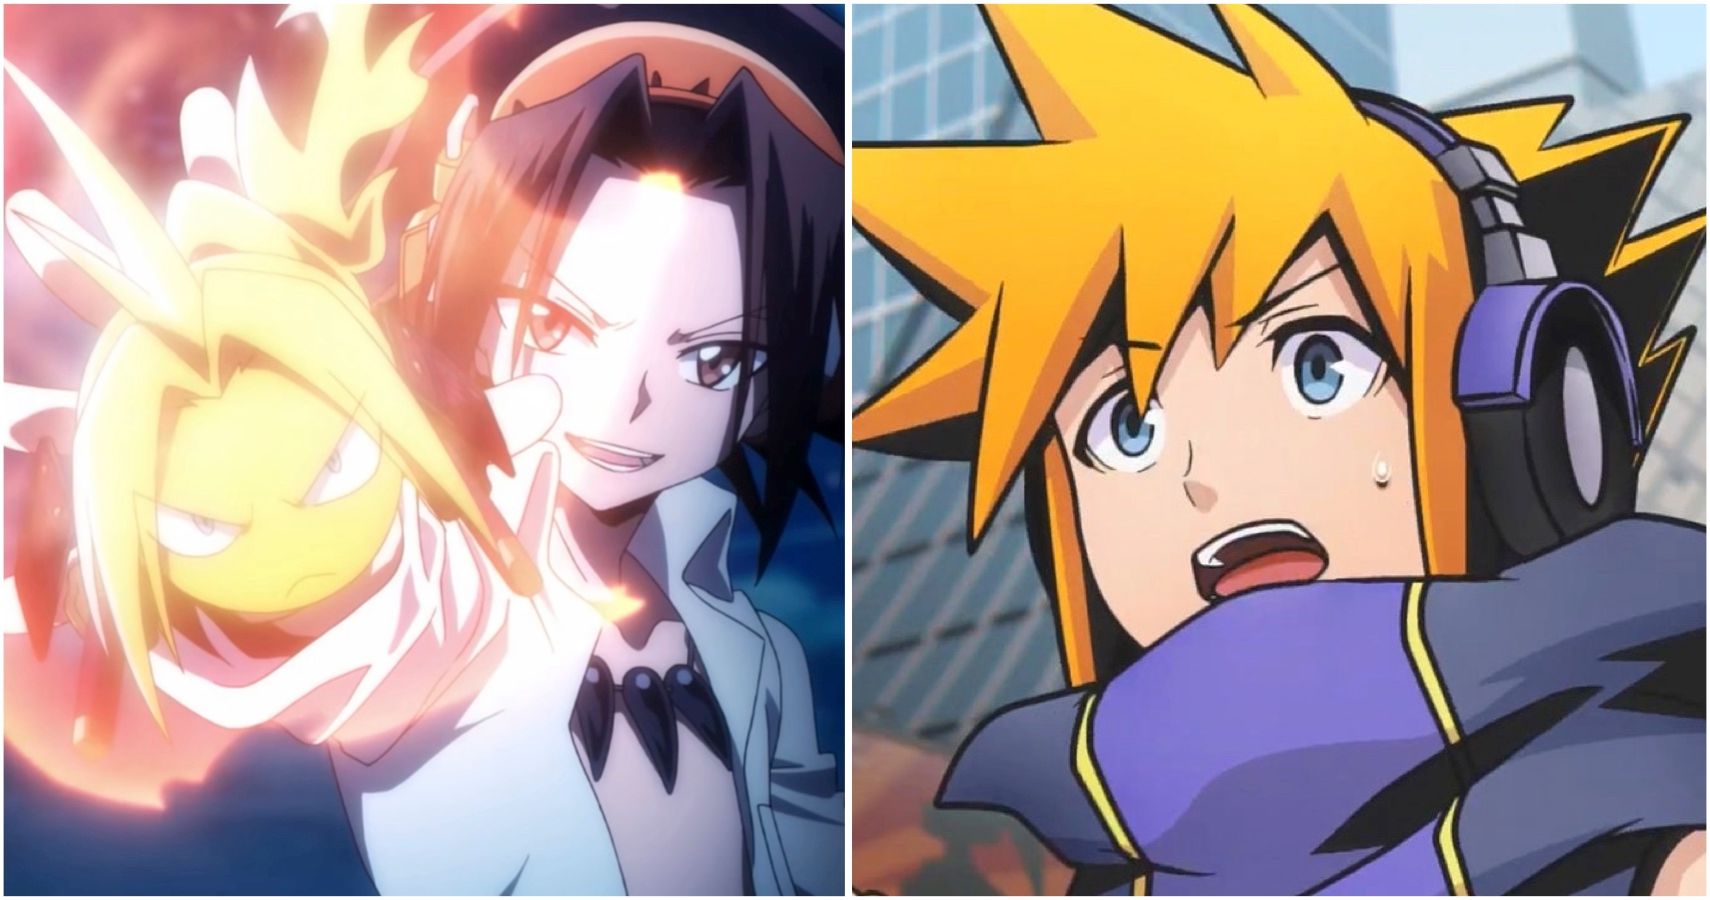 ANIME: New Spring 2021 Anime To Get Excited About!